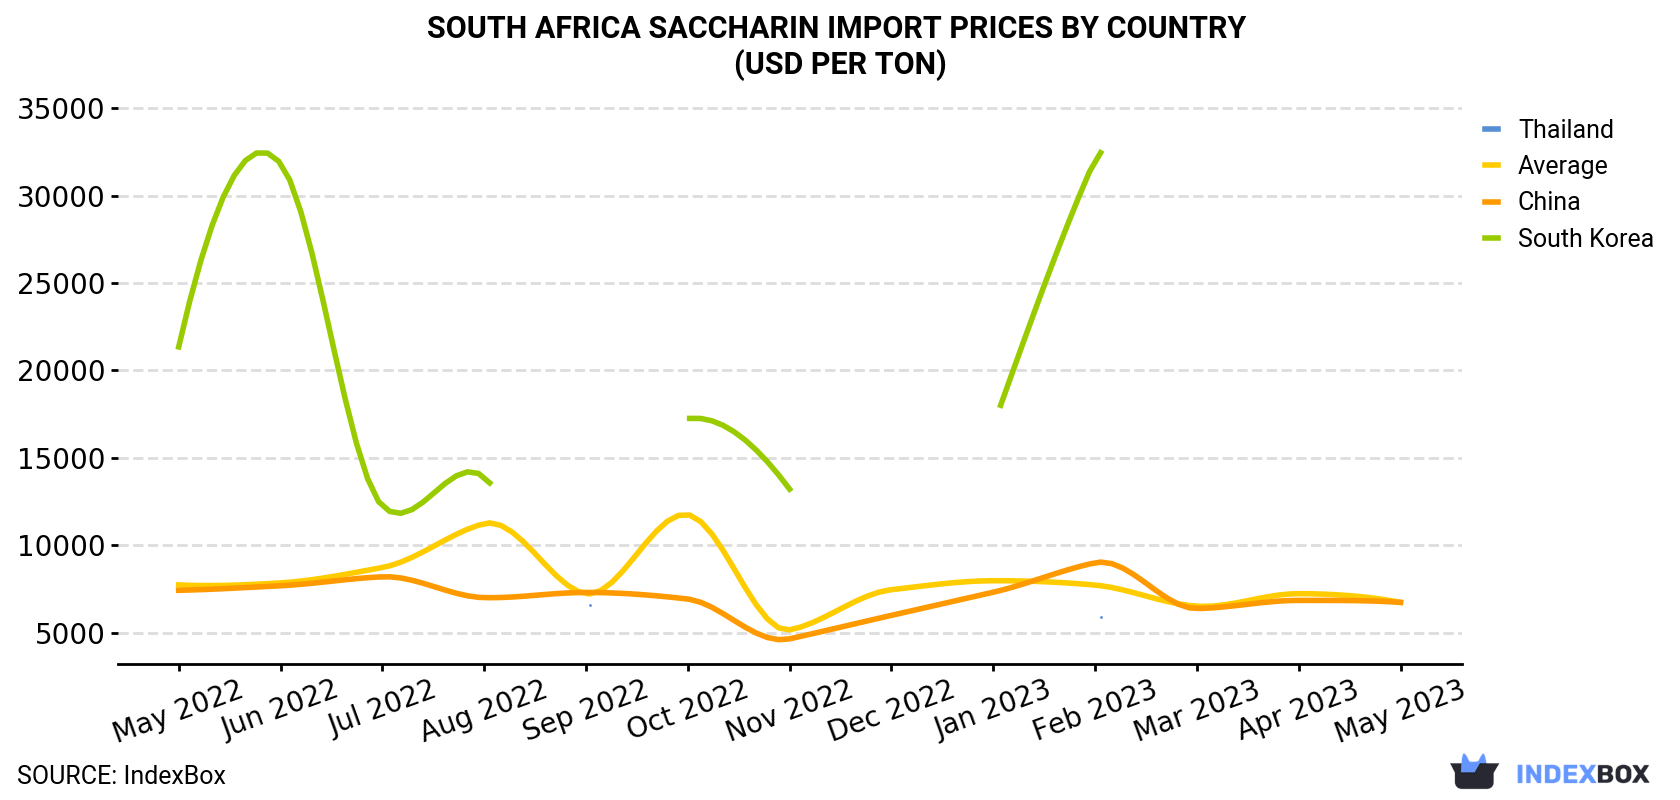 South Africa Saccharin Import Prices By Country (USD Per Ton)